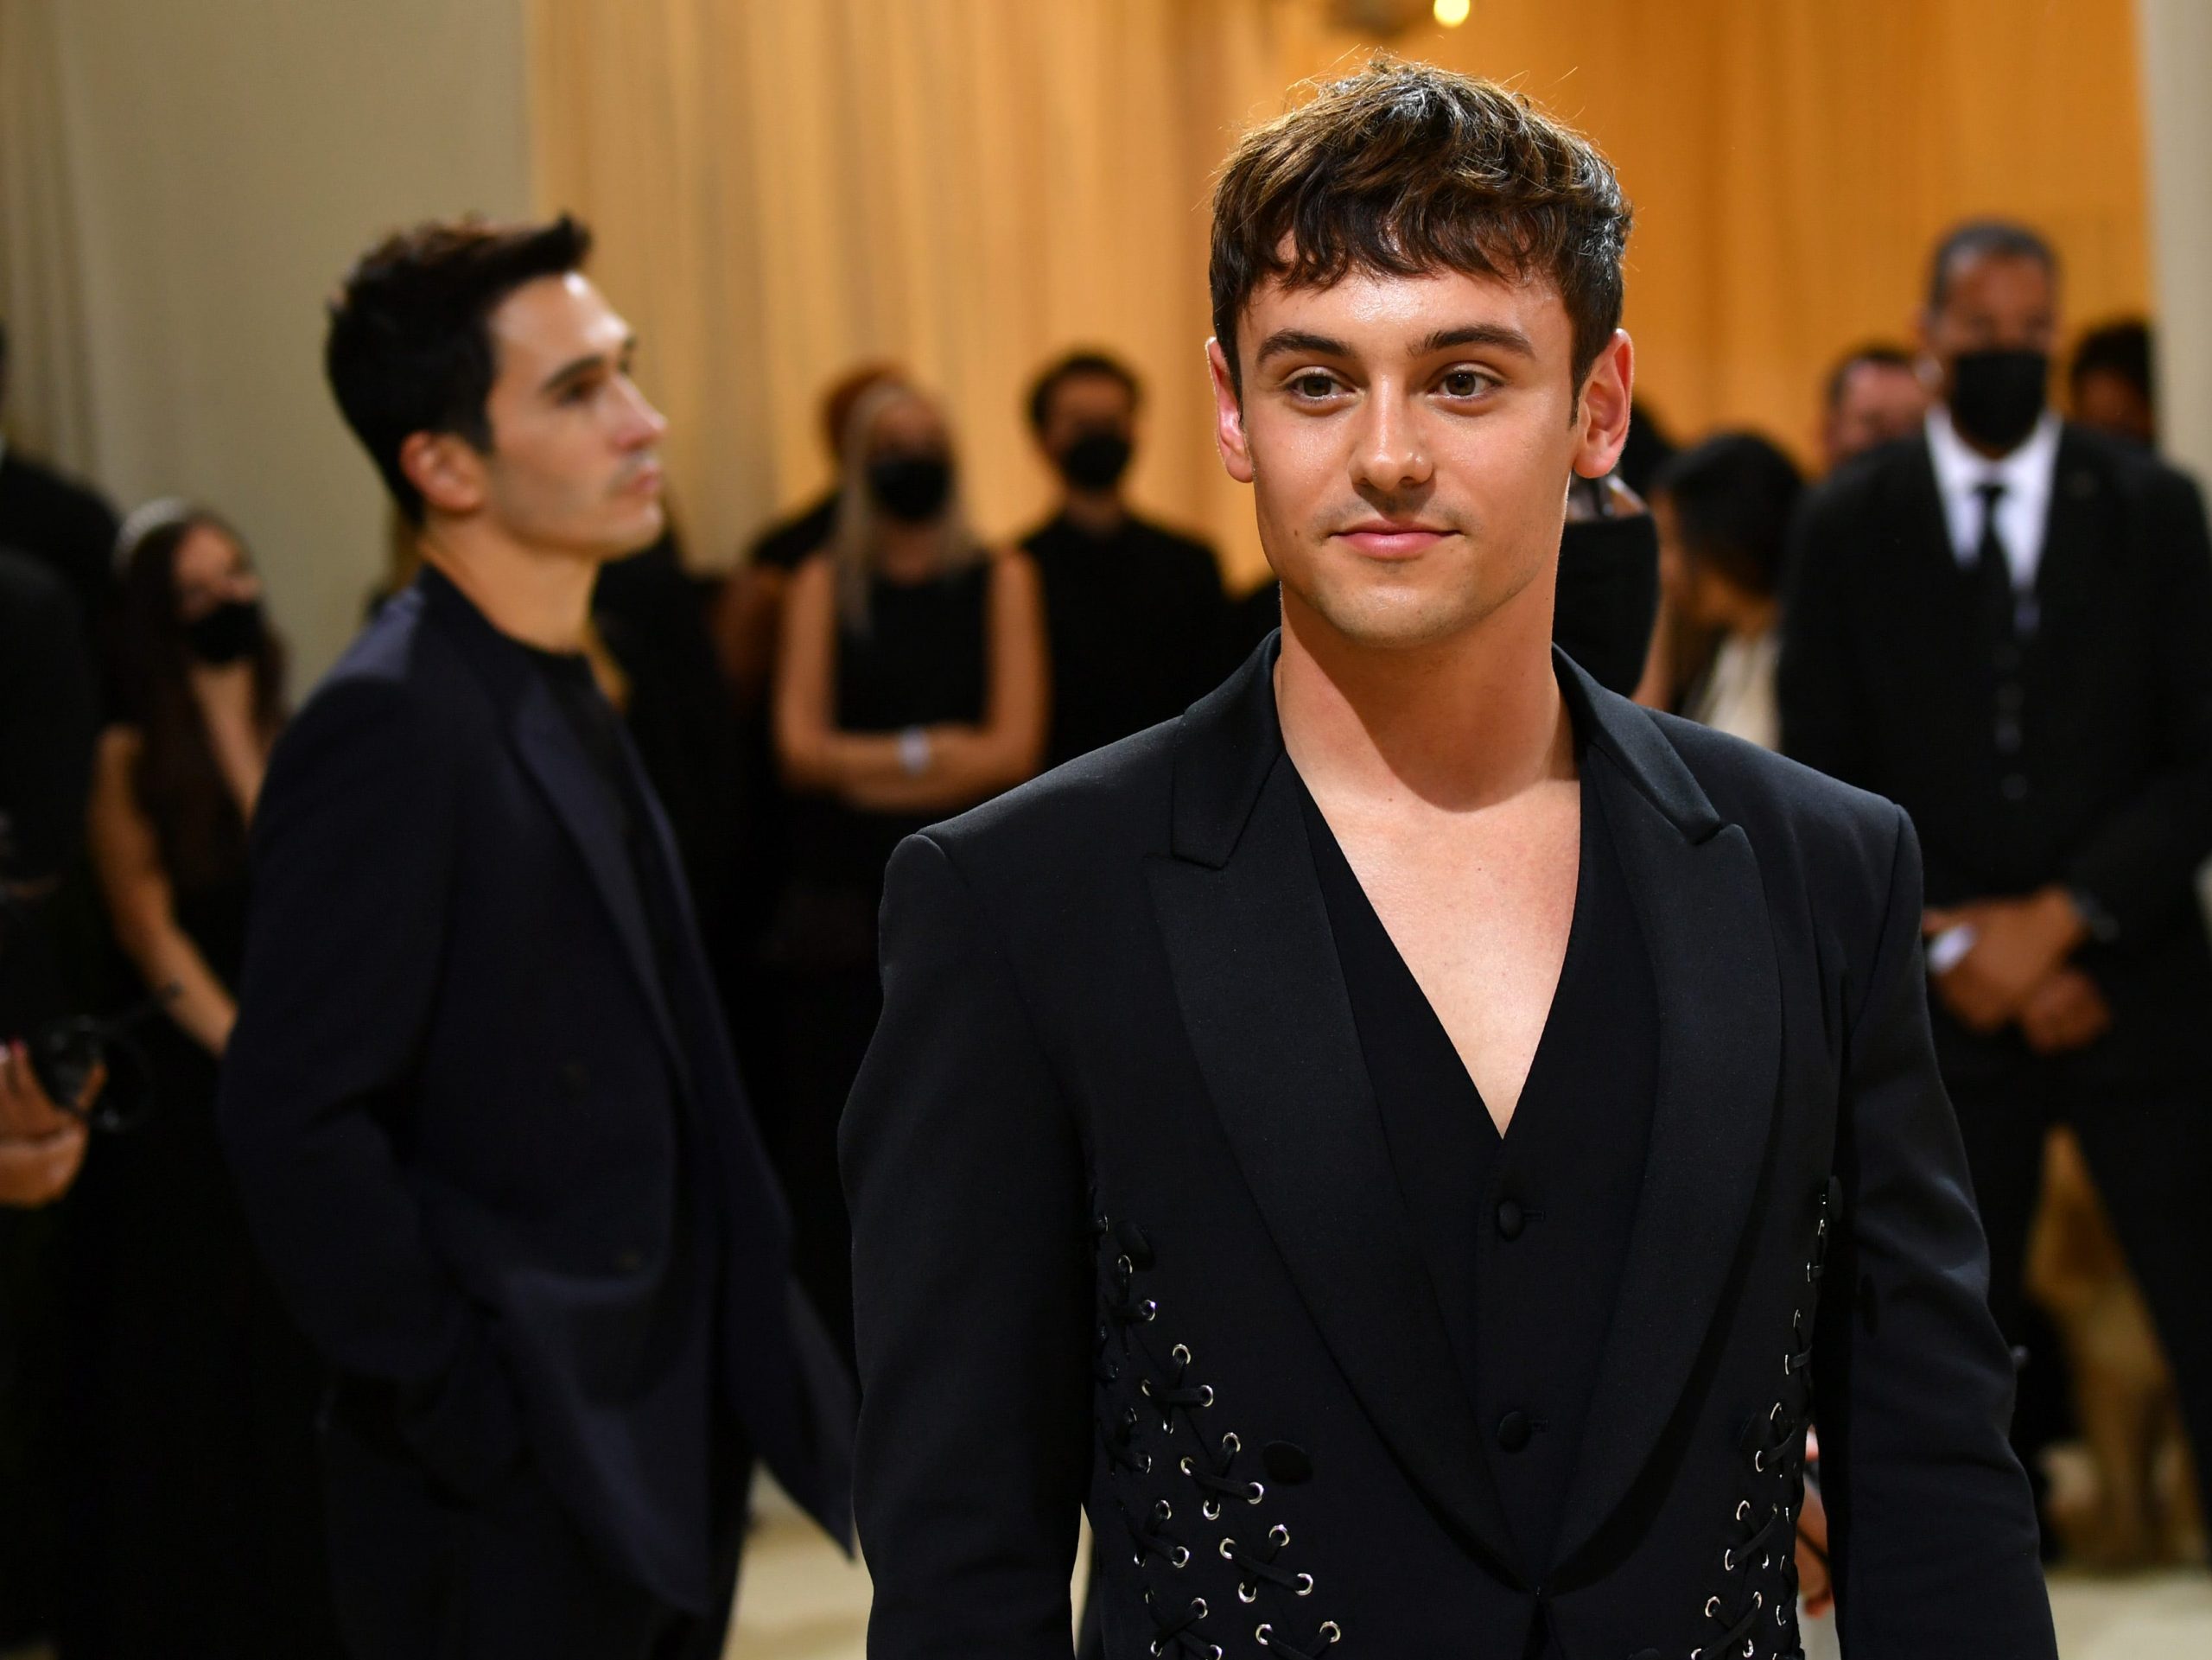 Tom Daley attends The 2021 Met Gala Celebrating In America: A Lexicon Of Fashion at Metropolitan Museum of Art on September 13, 2021 in New York City.